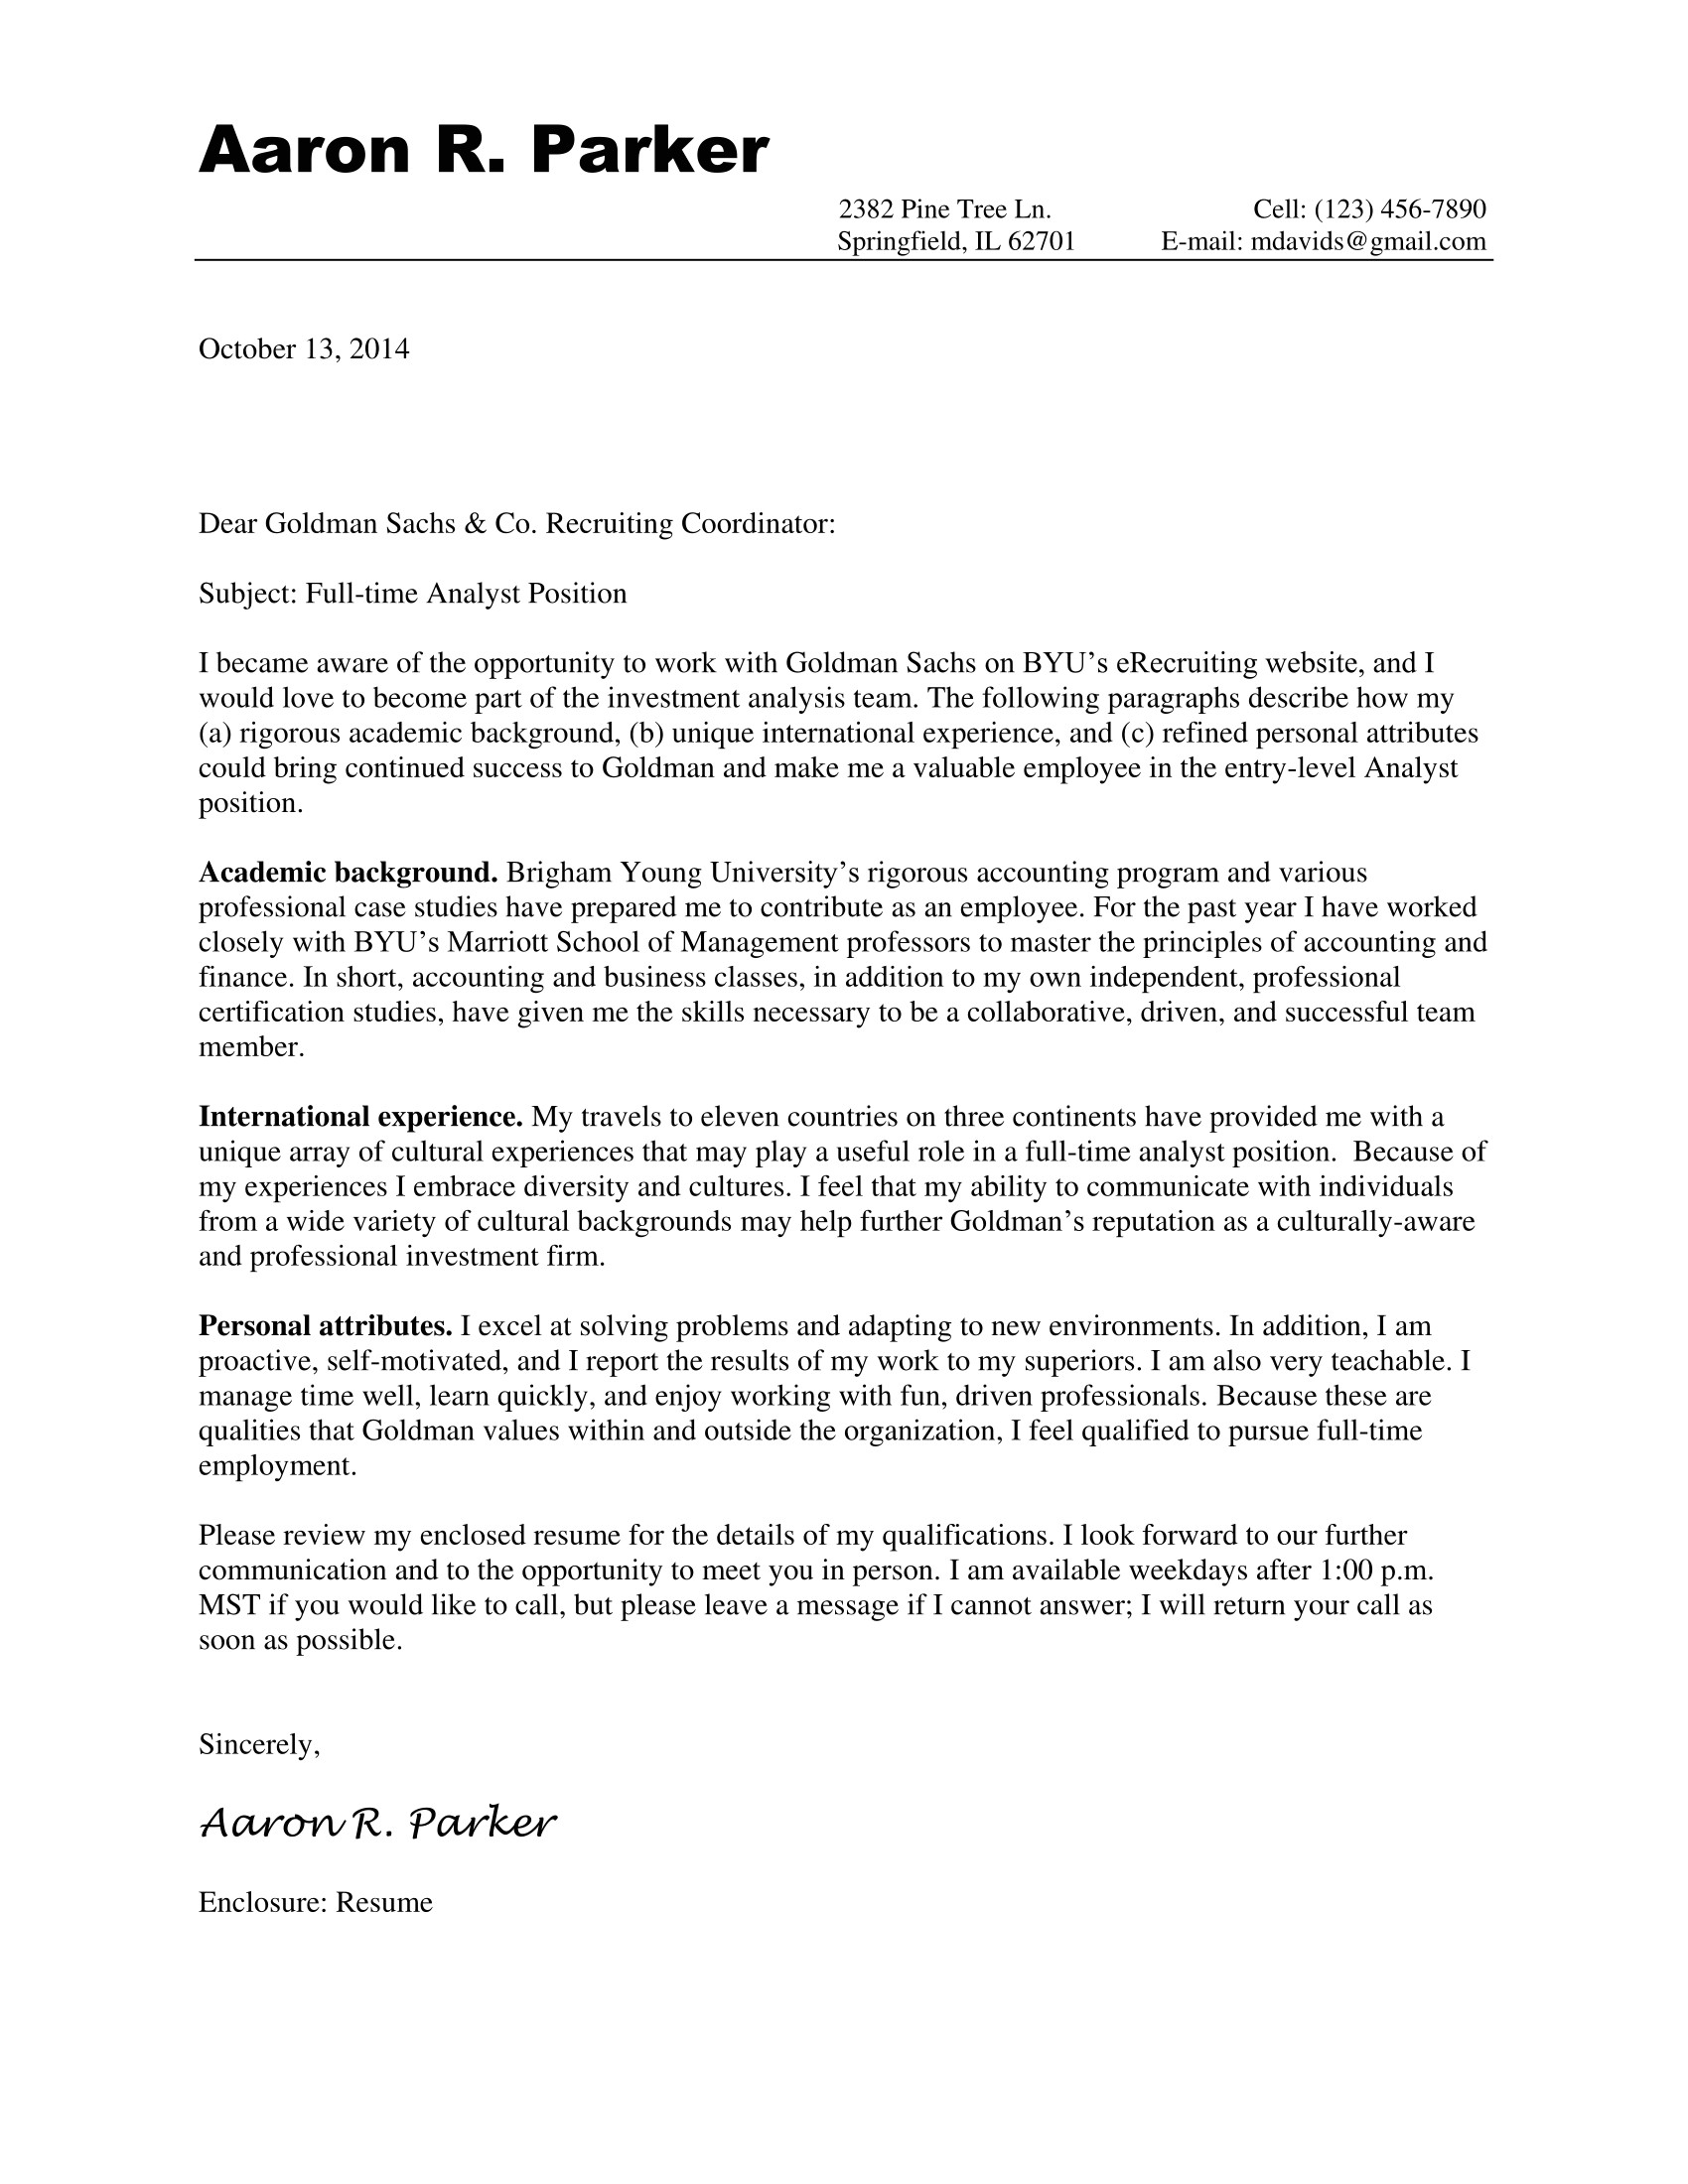 aaron cover letter